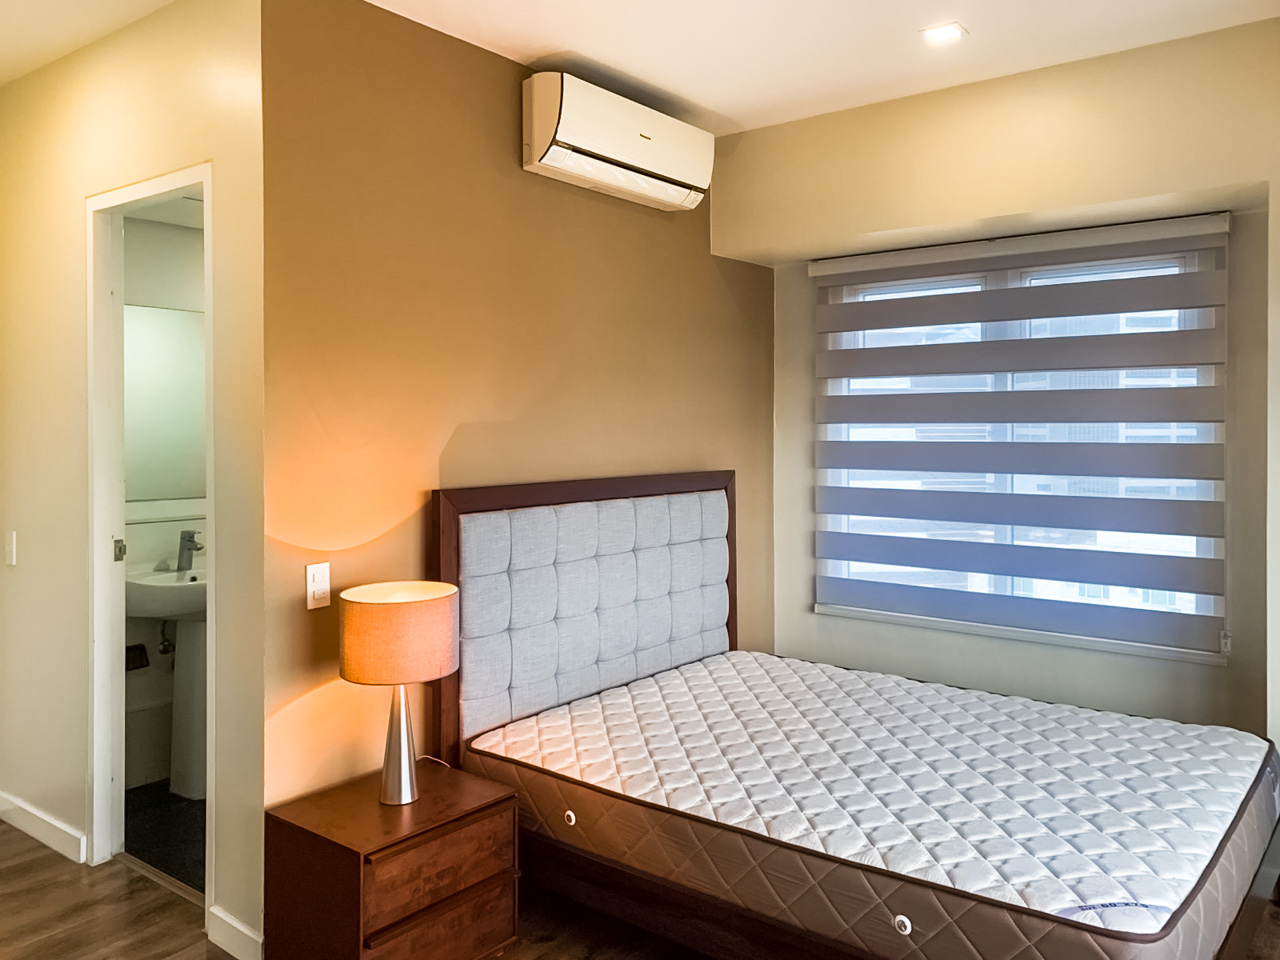 RCSP4 Furnished 2 Bedroom Condo for Rent in Cebu Business Park - 6